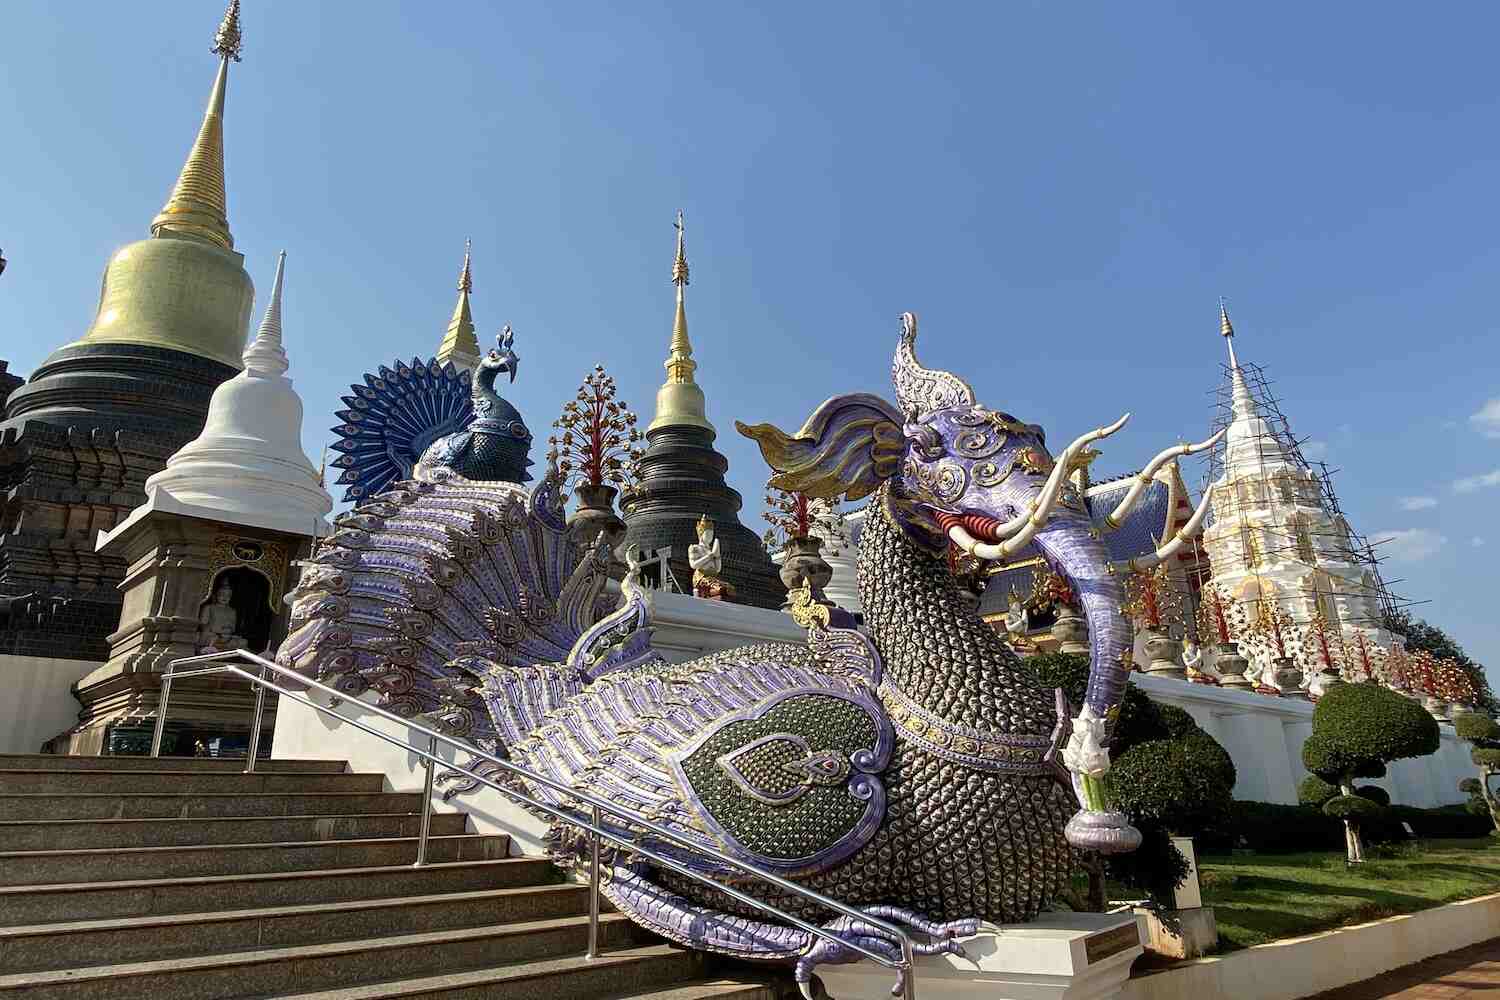 Mythical animal statues at a Thai temple.